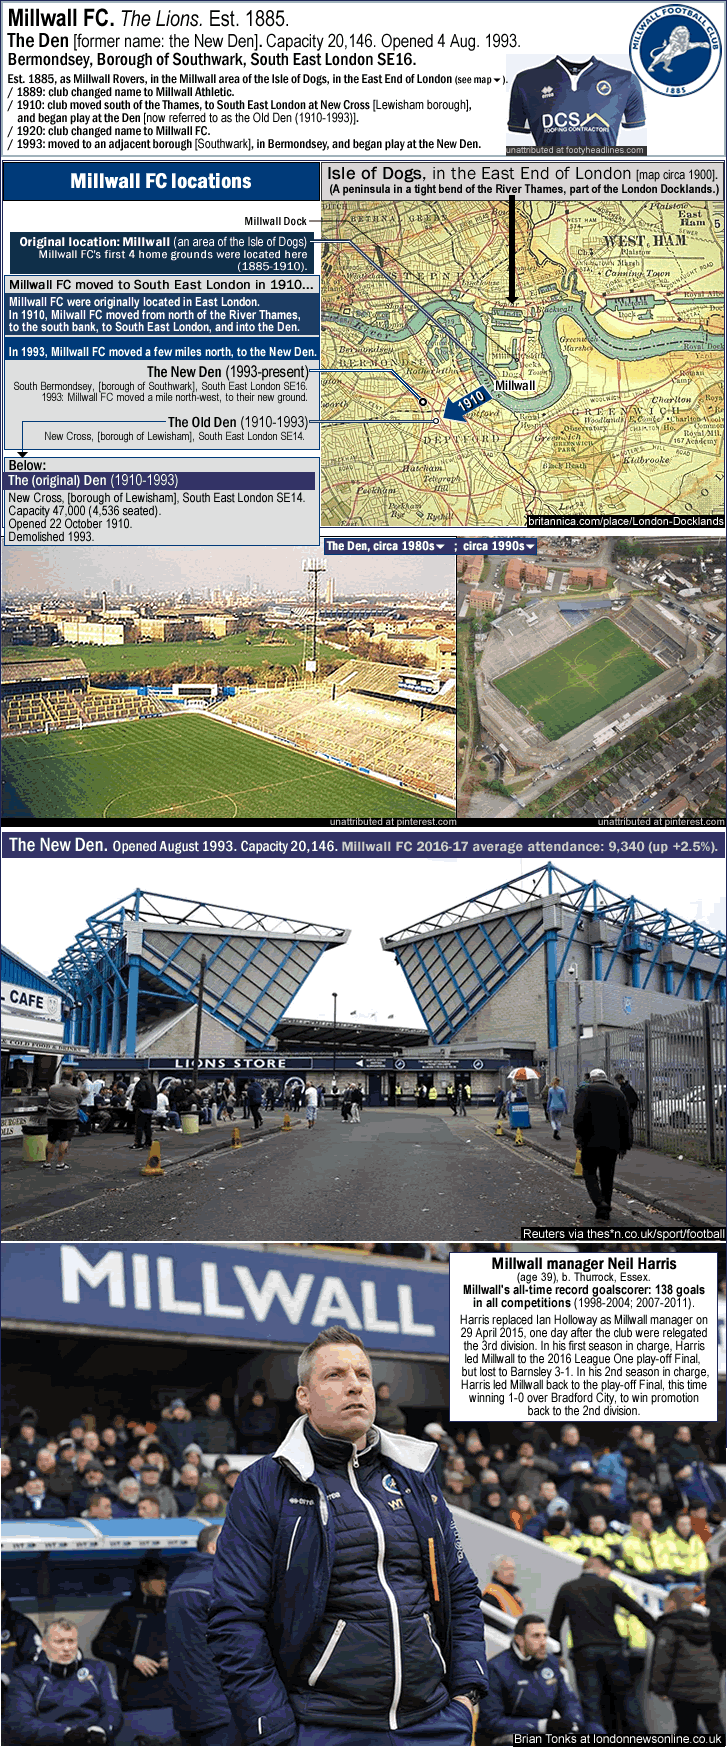 millwall-fc_grounds_1885-2017_isle-of-dogs_east-london_south-east-london_the-old-den_the-new-den_map_the-den_neil-harris_i_.gif